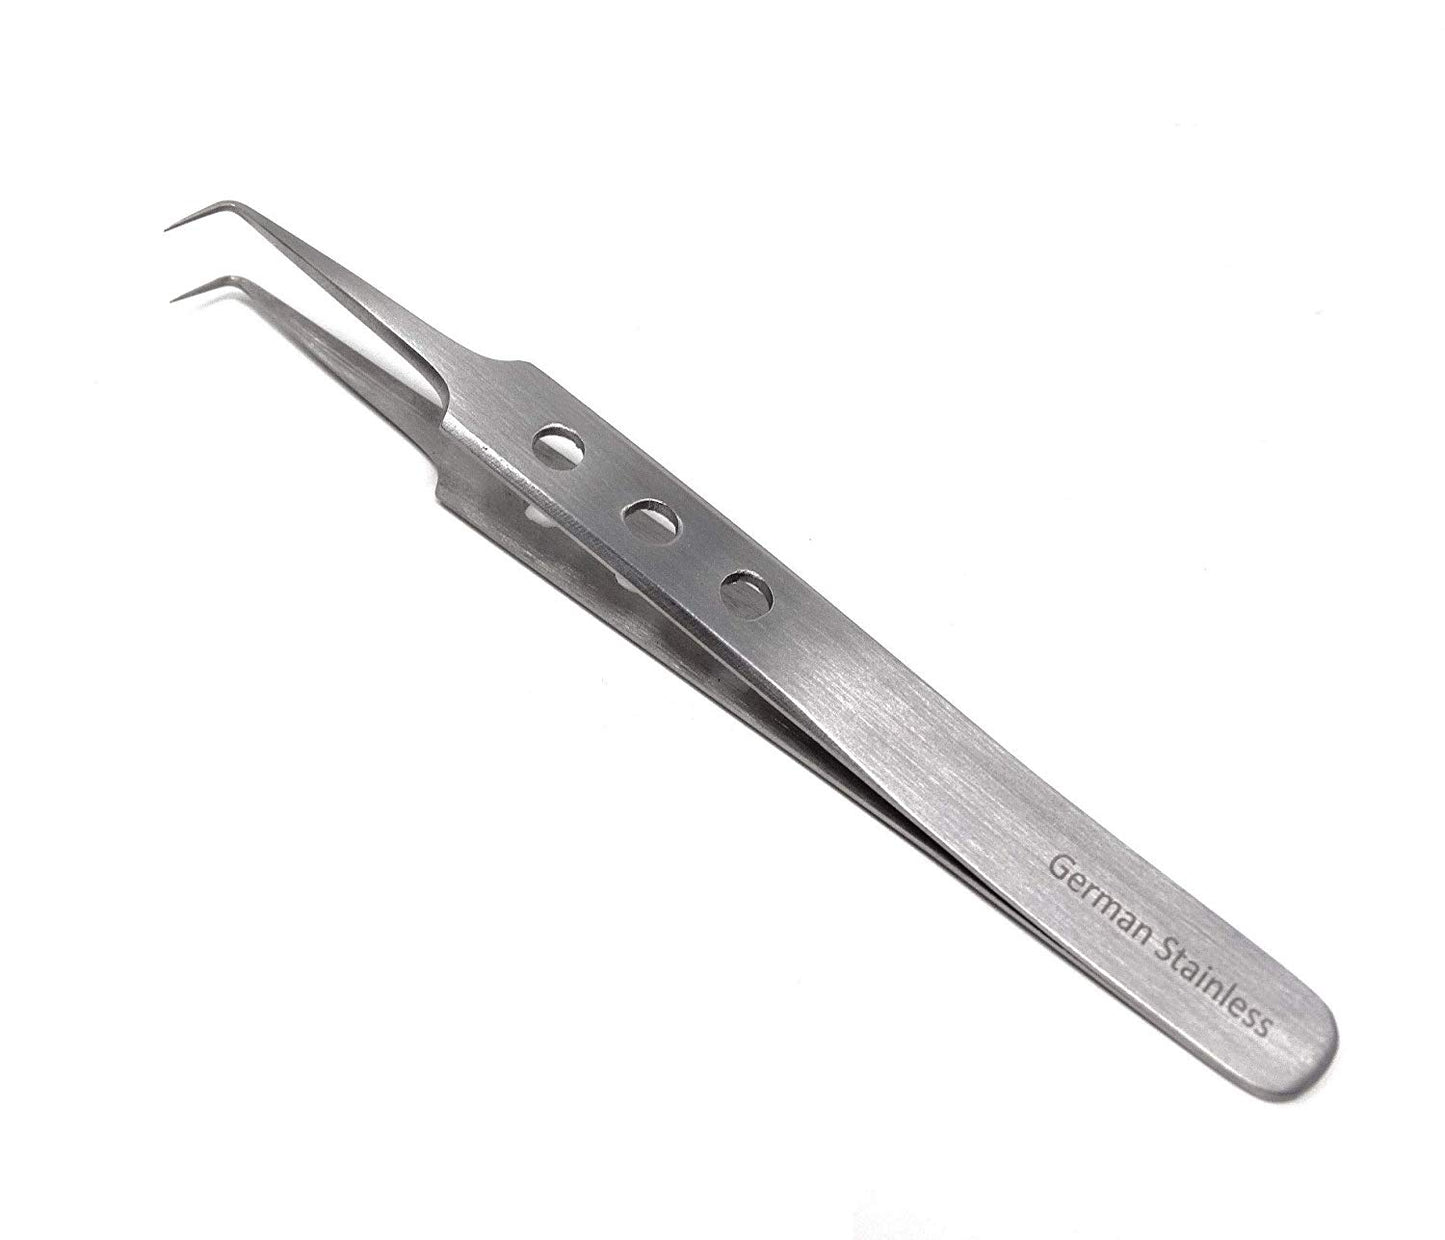 Stainless Steel Micro Surgical Forceps Tweezers A Type Right Angled 90 Degree, Fenestrated Handle, Fine Point, Premium Quality